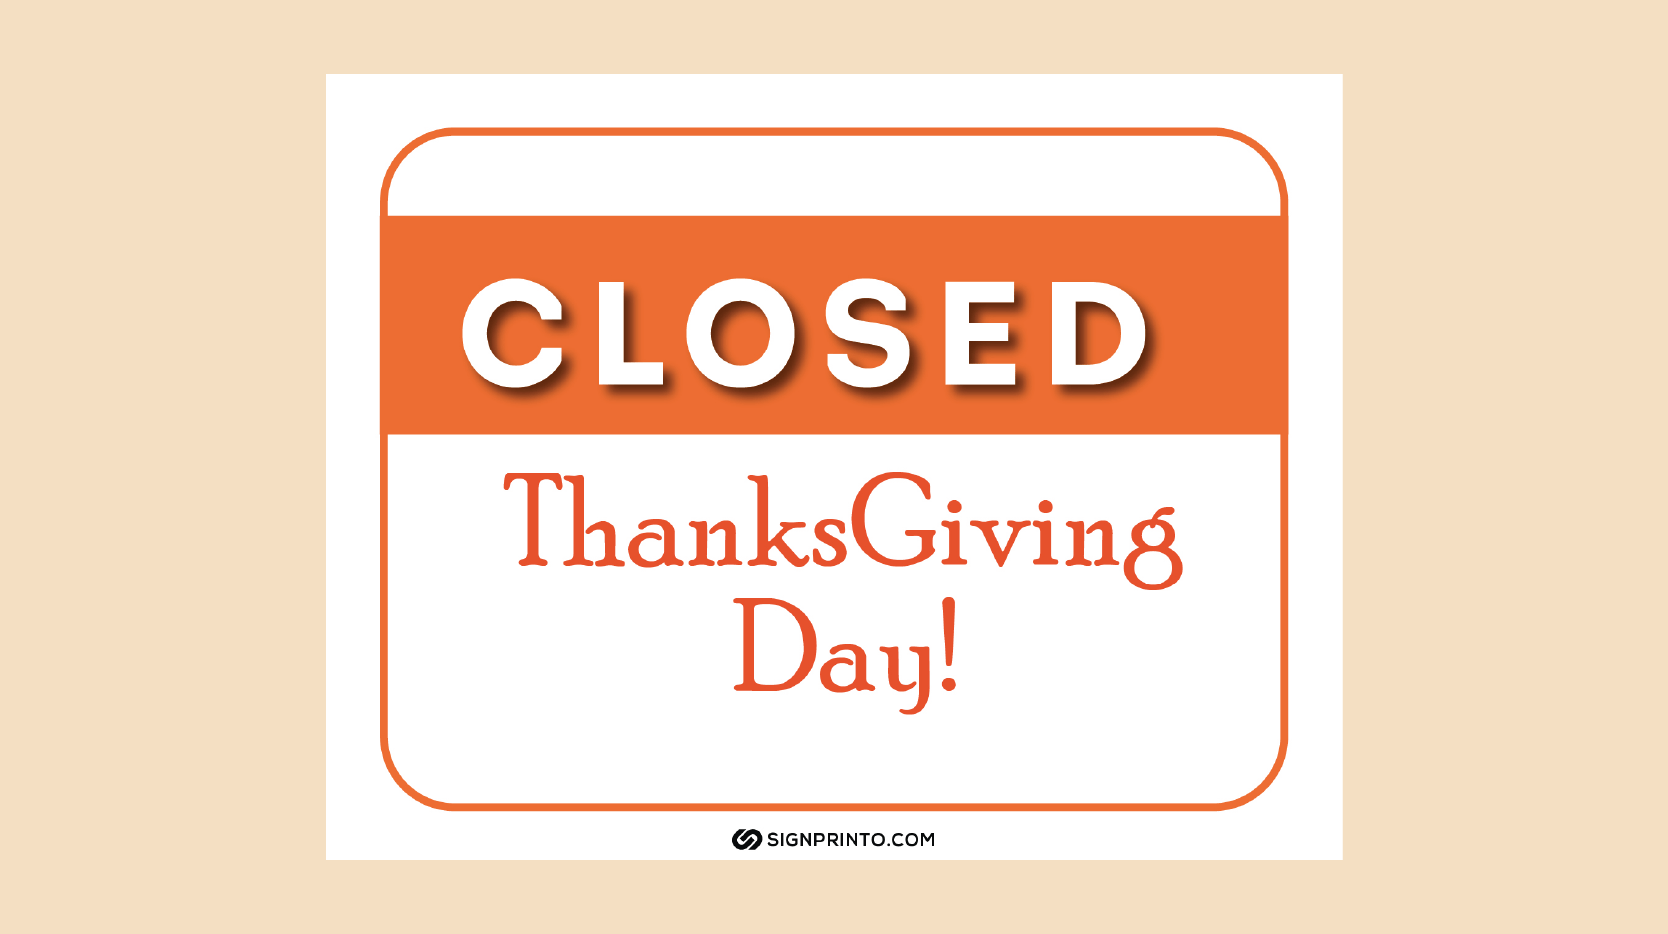 Closed for Thanksgiving Sign